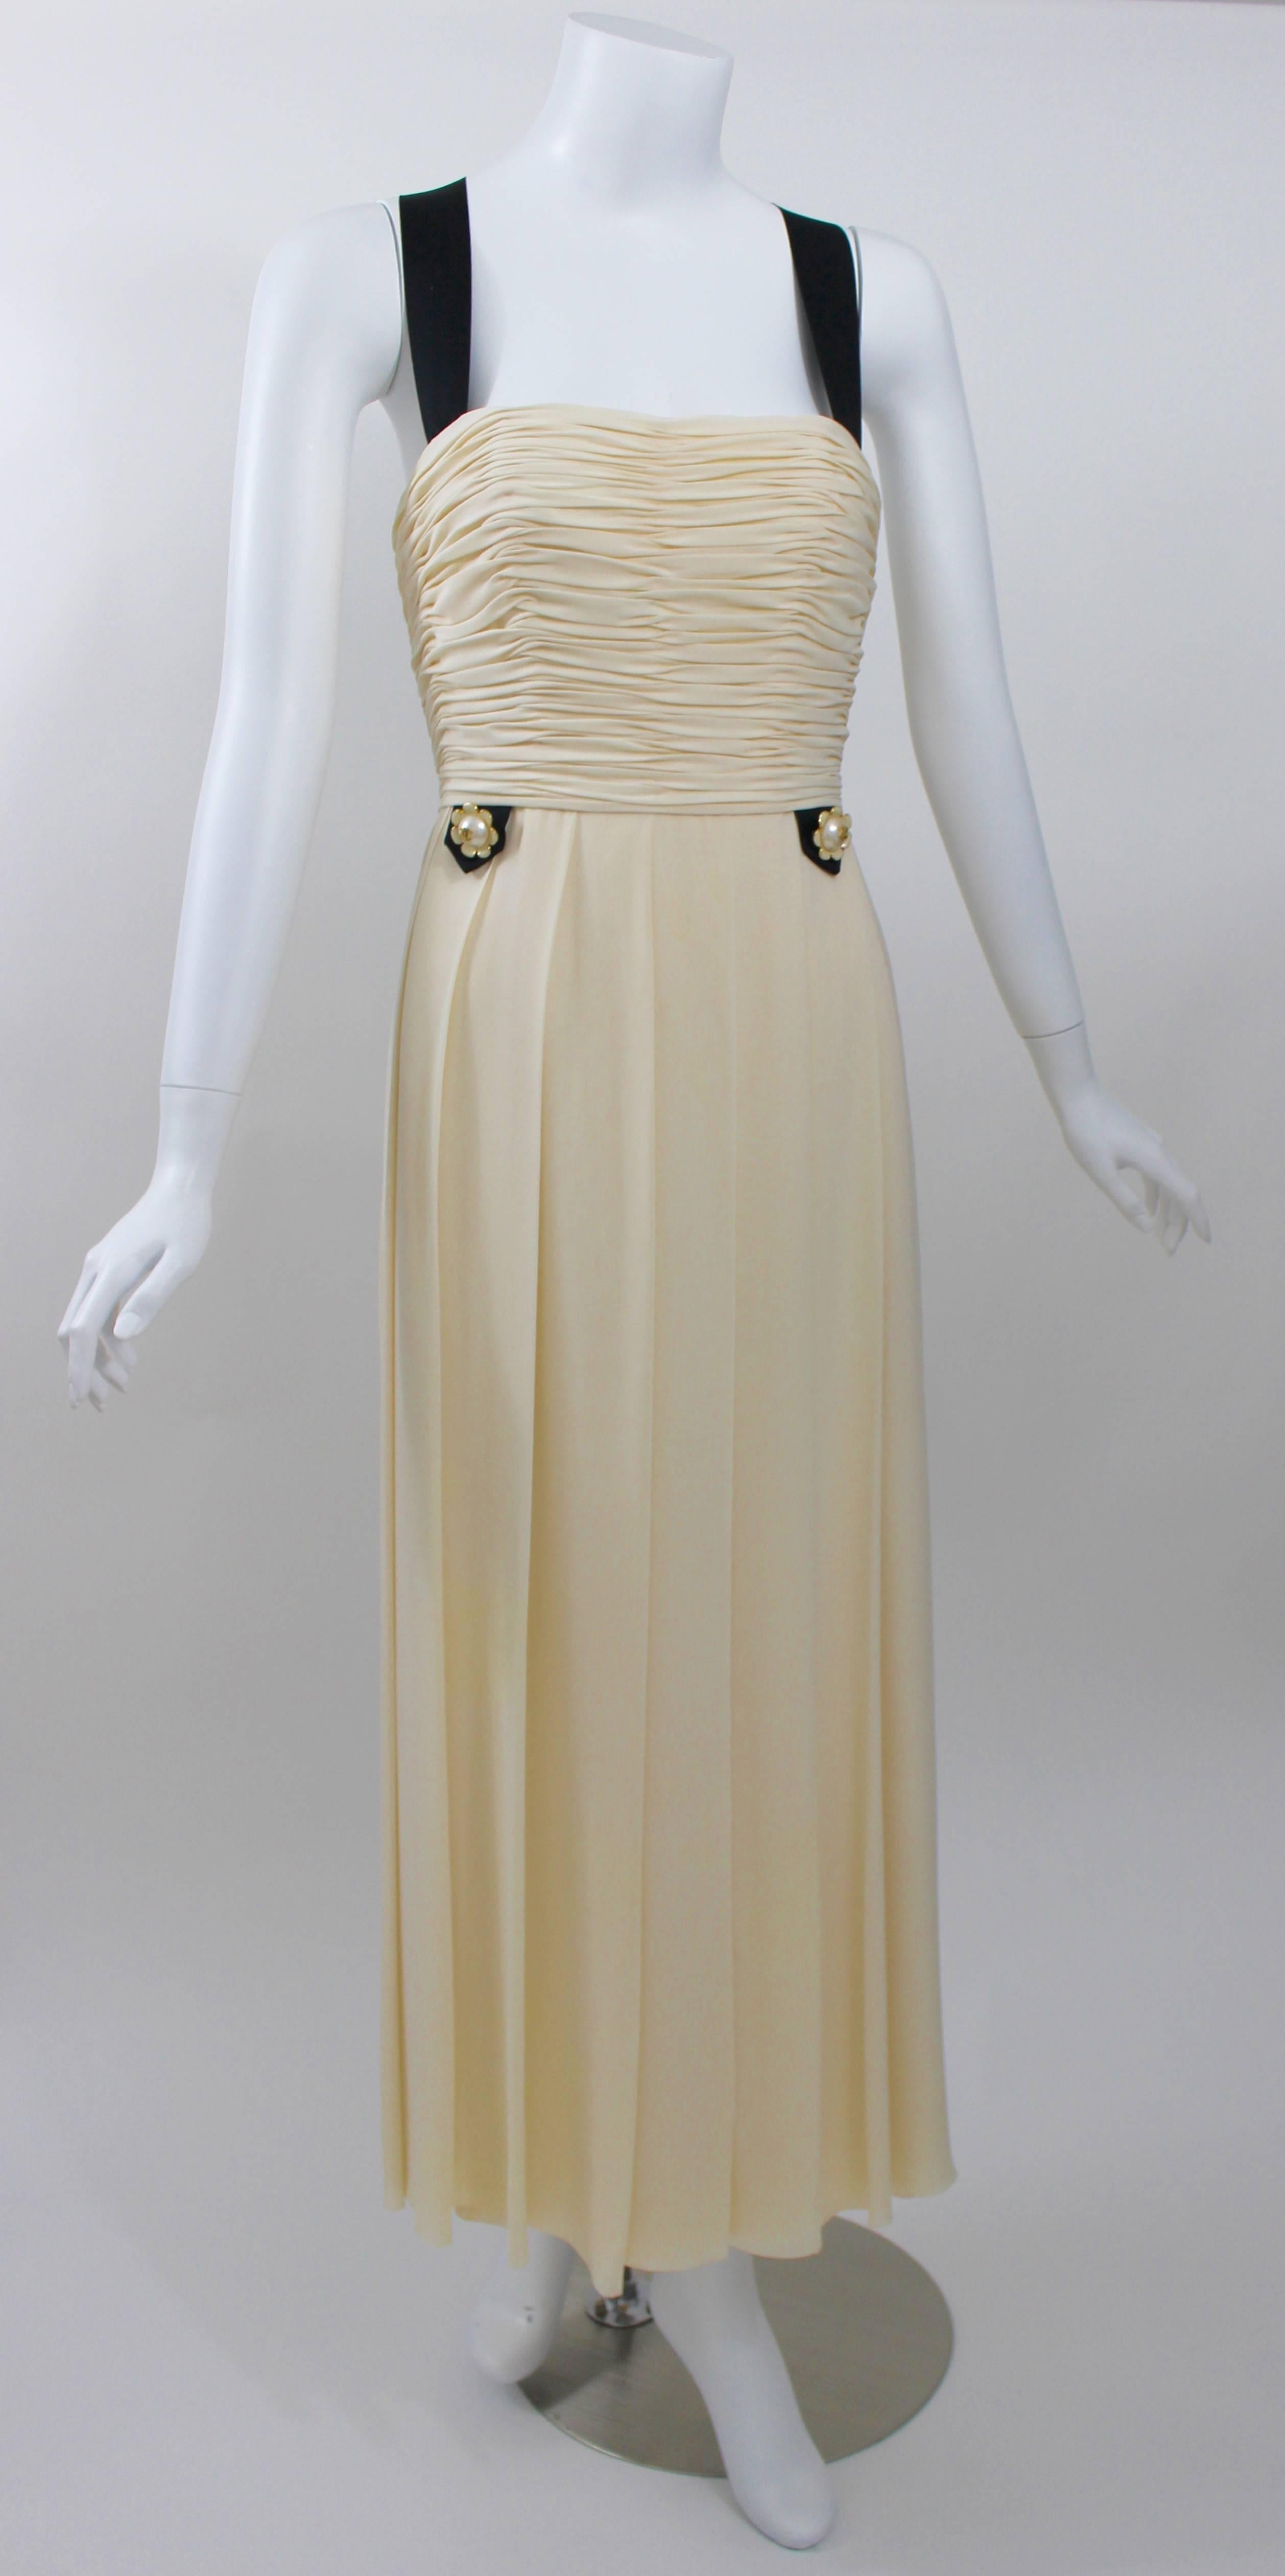 A gorgeous vintage Chanel dress in ivory silk chiffon with a gathered and boned bodice. 
Pleated skirt.
Black silk satin ribbon straps from the front of the dress that form a Y shape in the back. 
Six pearl buttons with the gold CC logo down the